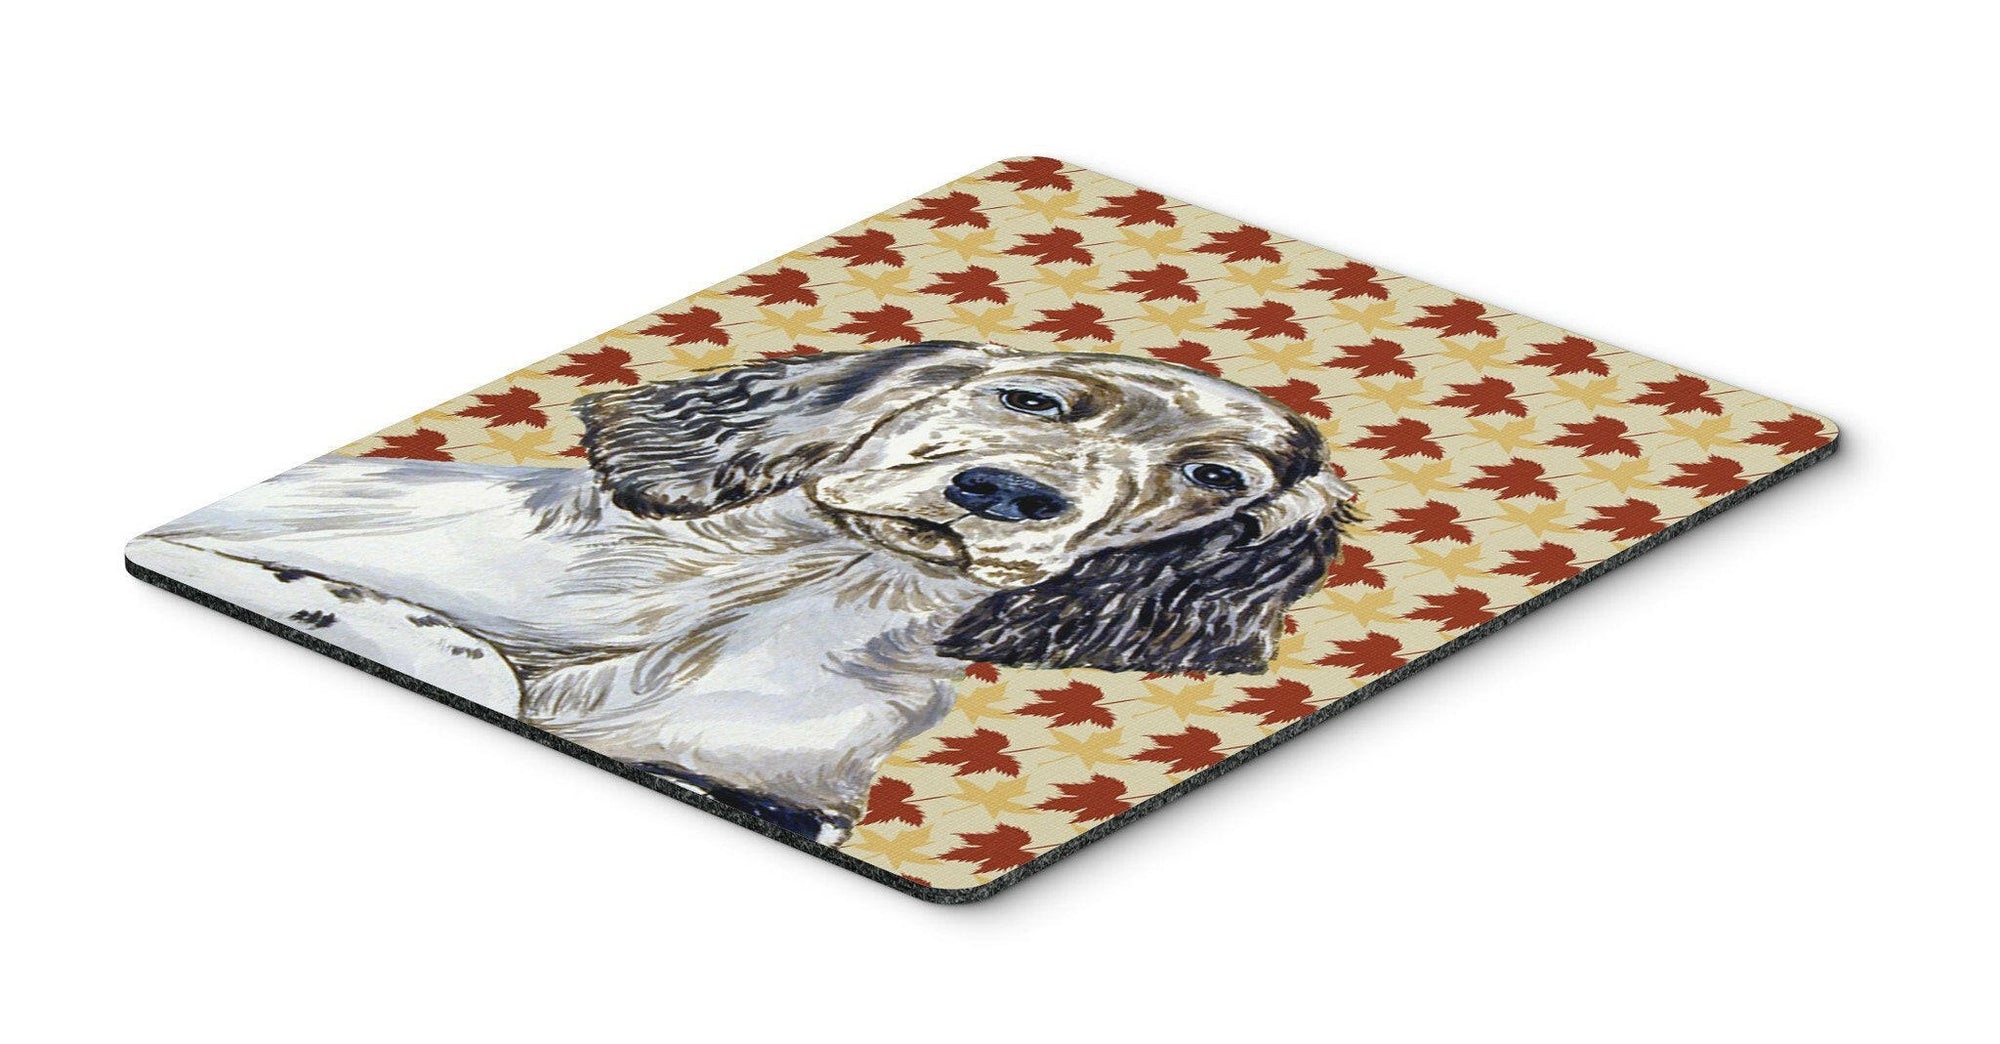 English Setter Fall Leaves Portrait Mouse Pad, Hot Pad or Trivet by Caroline's Treasures